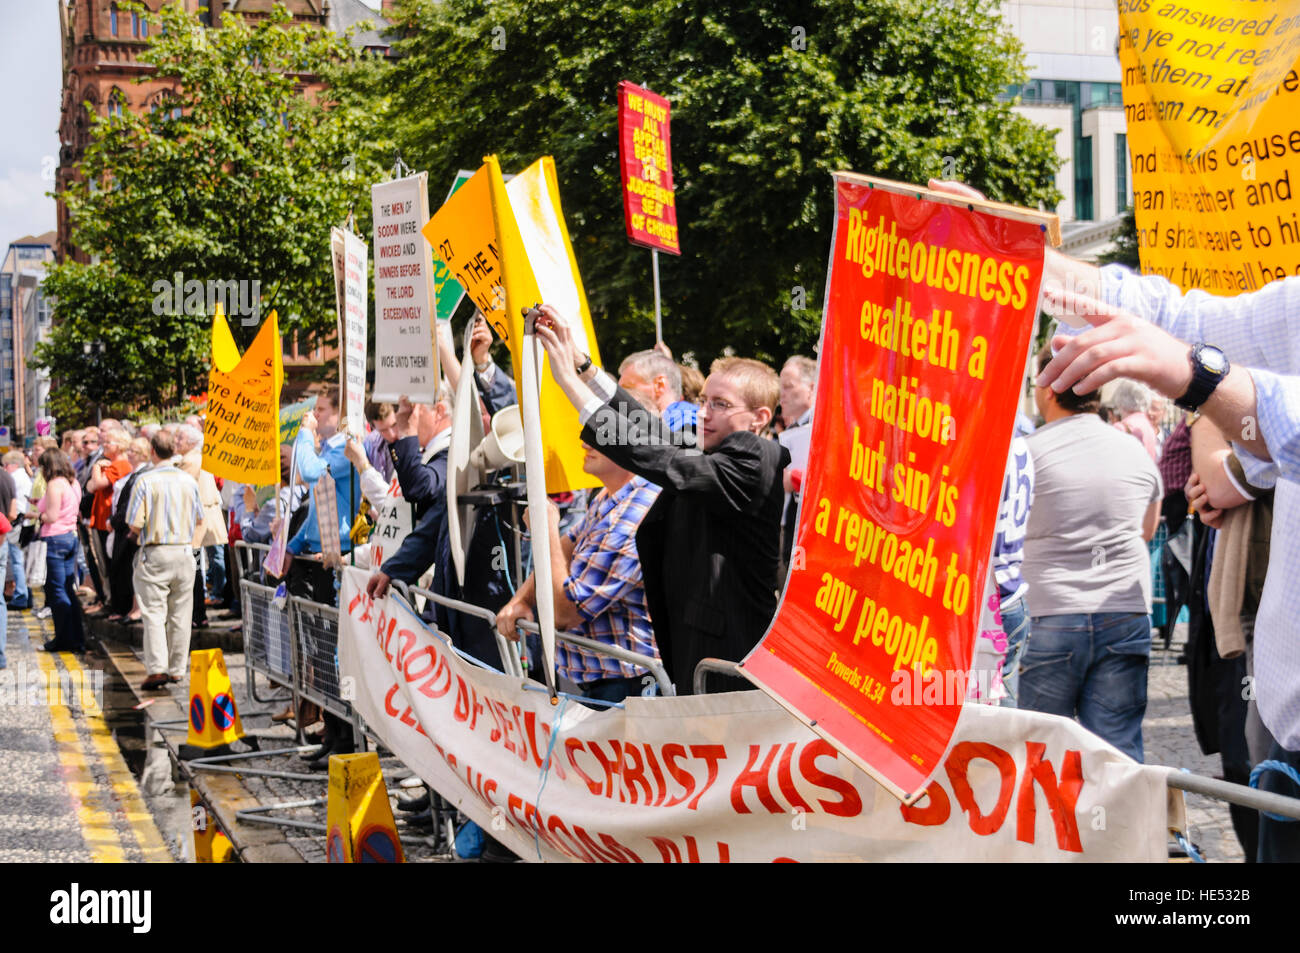 Members of the Free Presbyterian Church protest against the Gay Pride parade in Belfast. Stock Photo